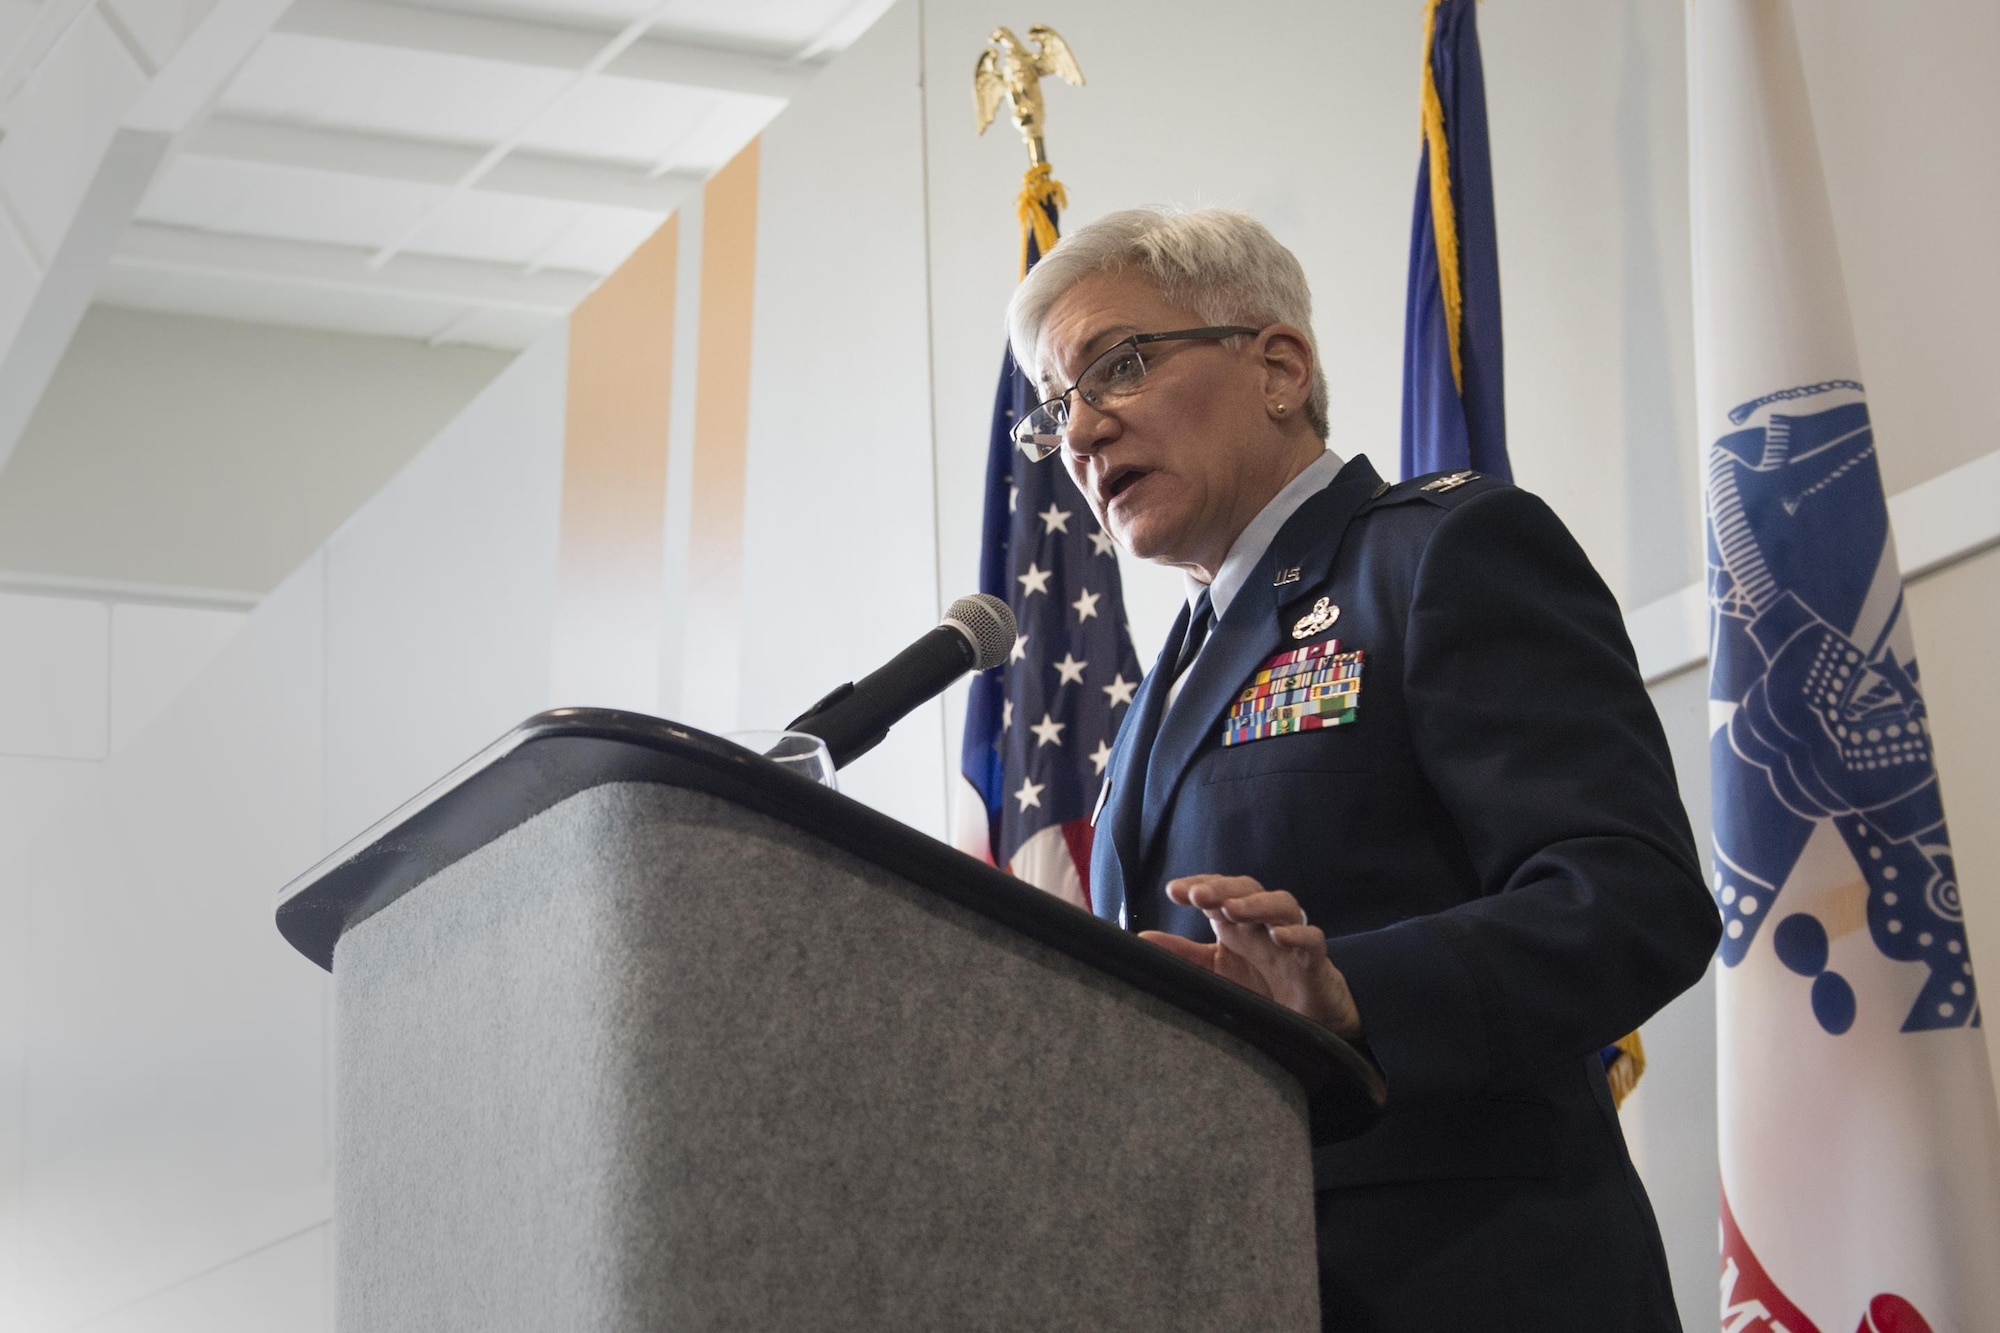 Col. Anna Schulte, 434th Maintenance Group commander, gives a speech at the 2016 Indiana Woman Veterans’ Conference in Indianapolis, April 15, 2016. In her speech, Schulte detailed the accomplishments made by woman veterans throughout our nation’s history. (U.S. Air Force photo/Tech. Sgt. Benjamin Mota)